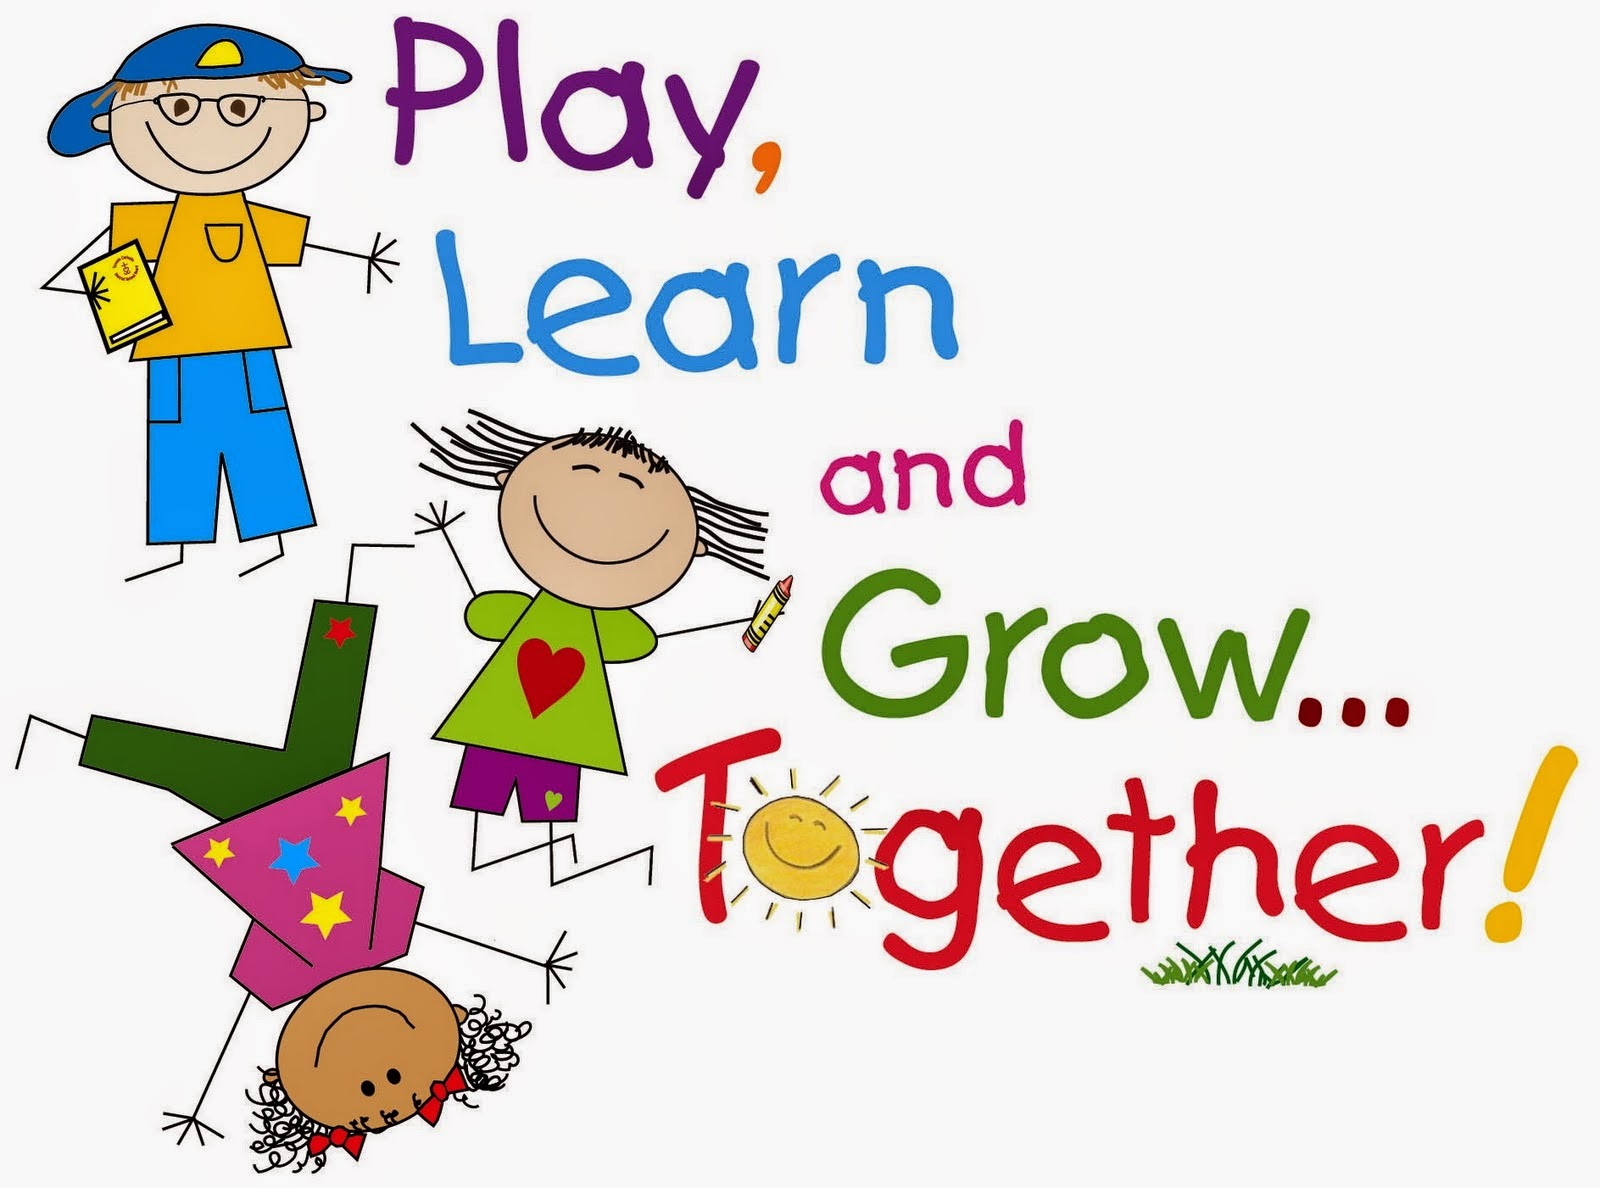 Play, learn and grow together!